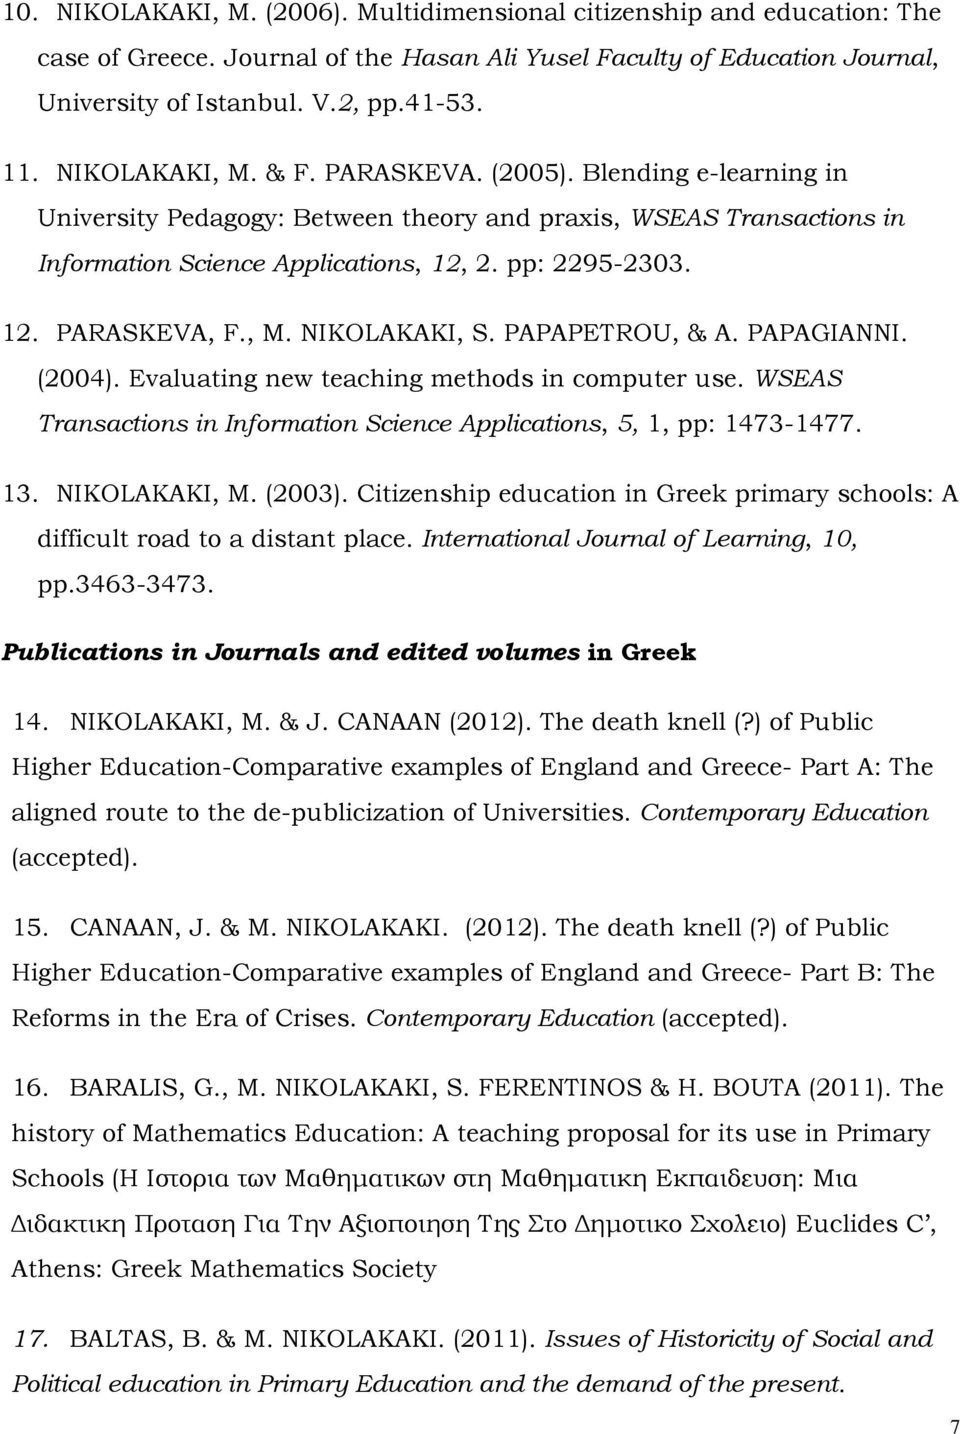 , M. NIKOLAKAKI, S. PAPAPETROU, & A. PAPAGIANNI. (2004). Evaluating new teaching methods in computer use. WSEAS Transactions in Information Science Applications, 5, 1, pp: 1473-1477. 13.